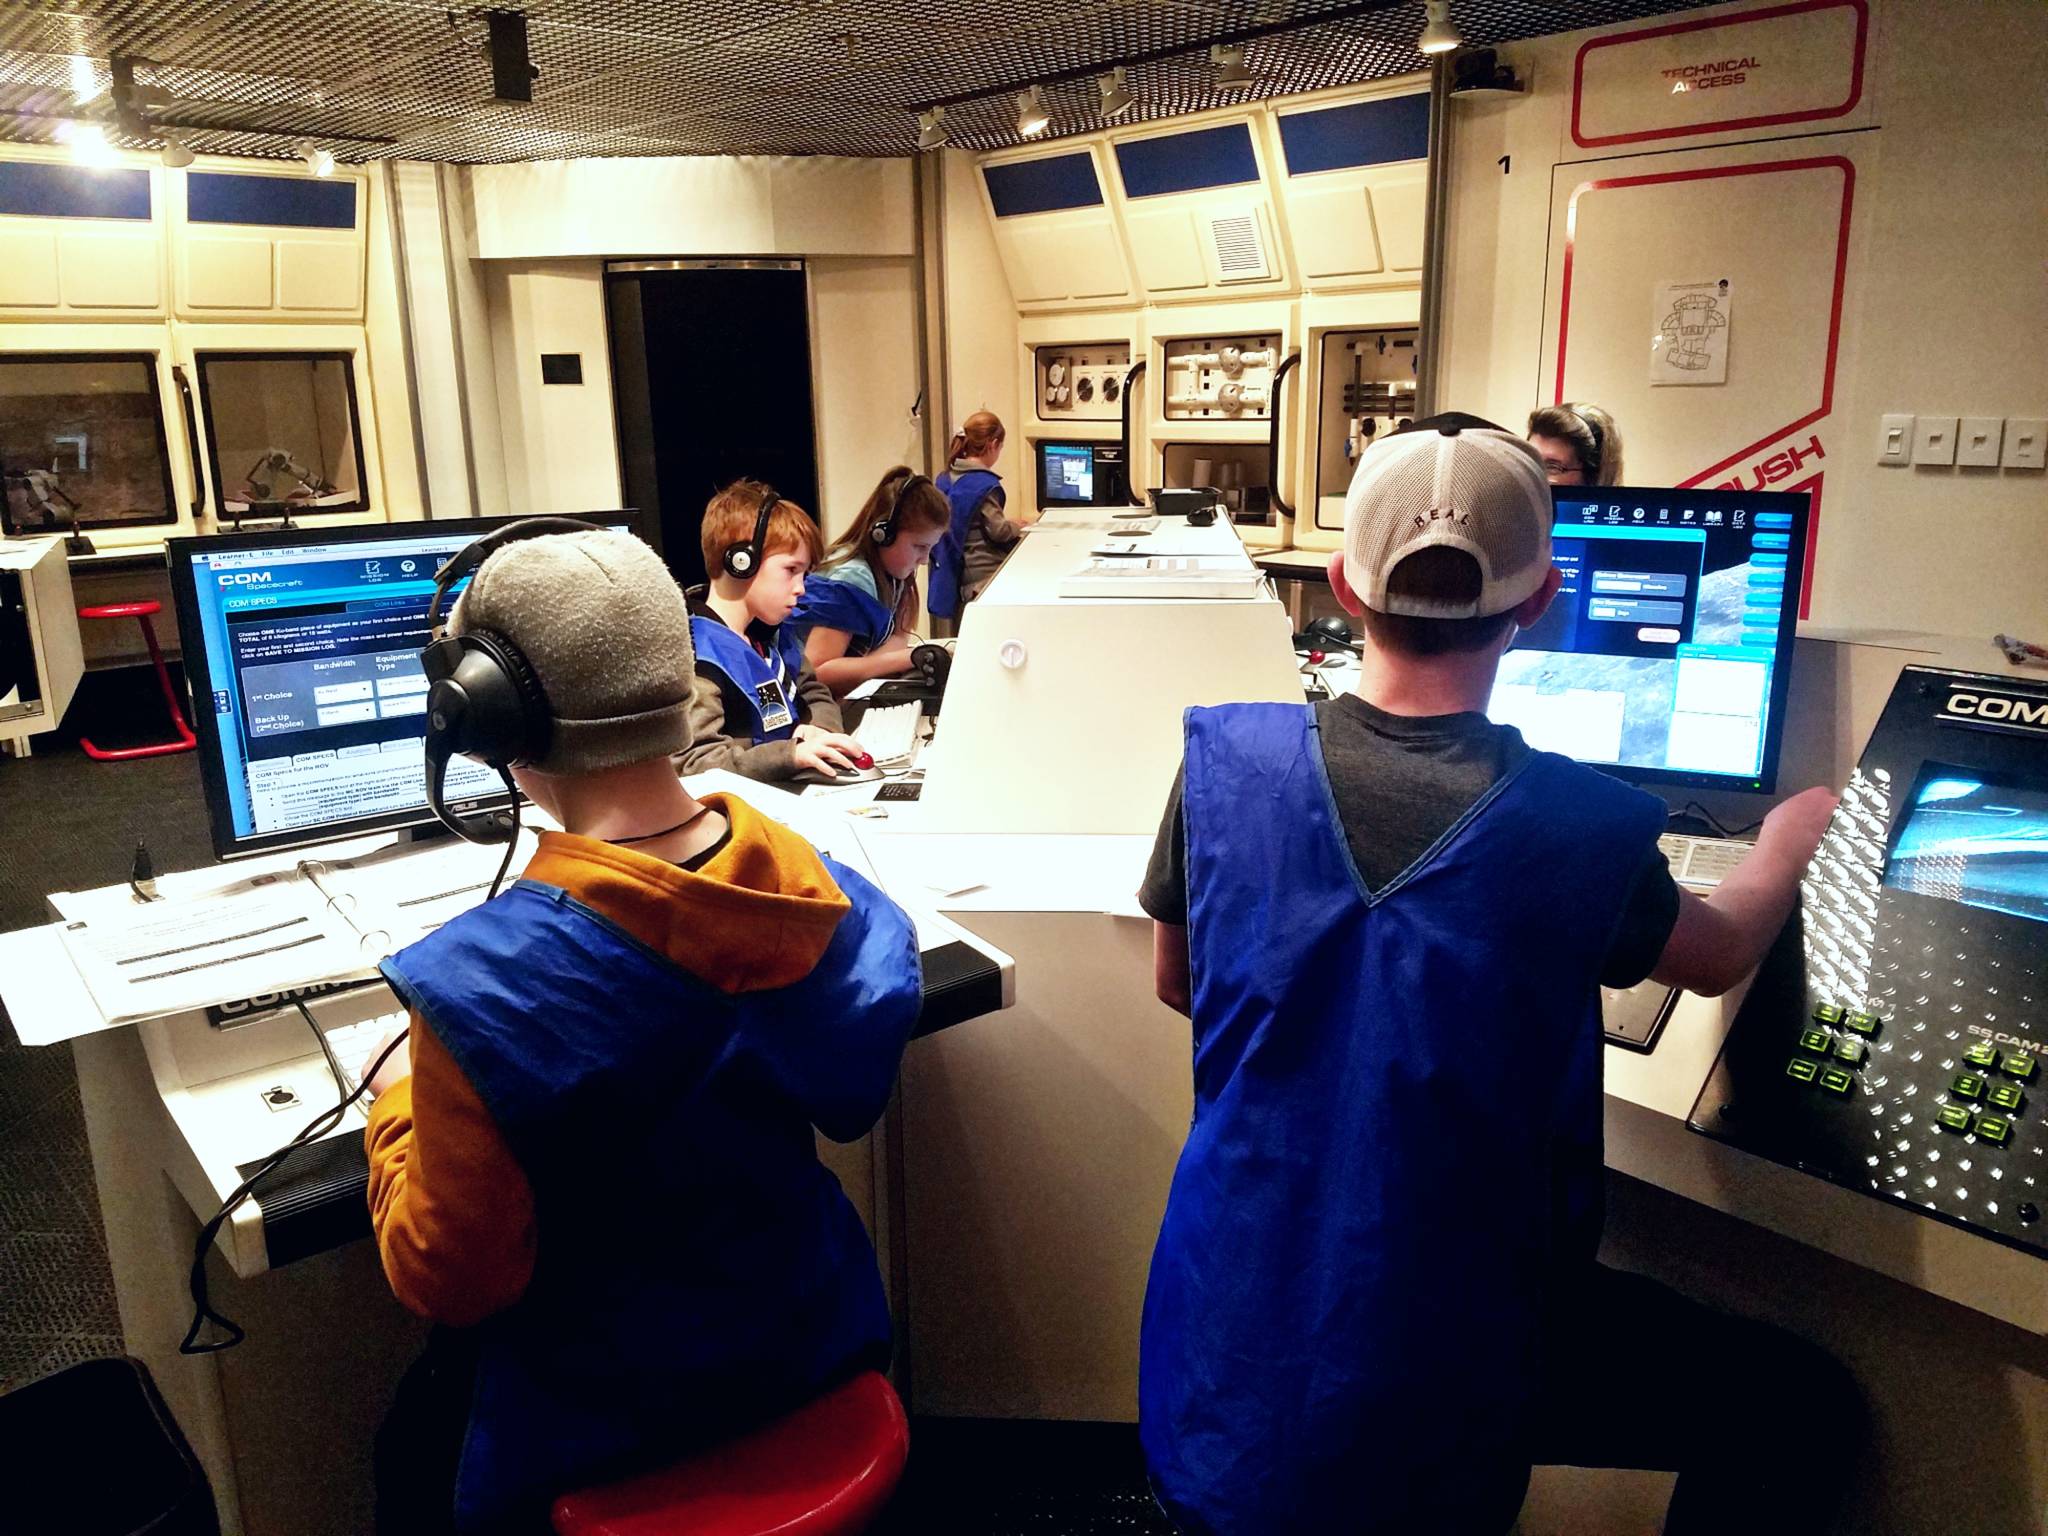 Kenai Peninsula students participate in a simulated space mission at the Challenger Learning Center in Kenai, Alaska, in this undated photo. (Courtesy Colette Gilmour/Challenger Learning Center)